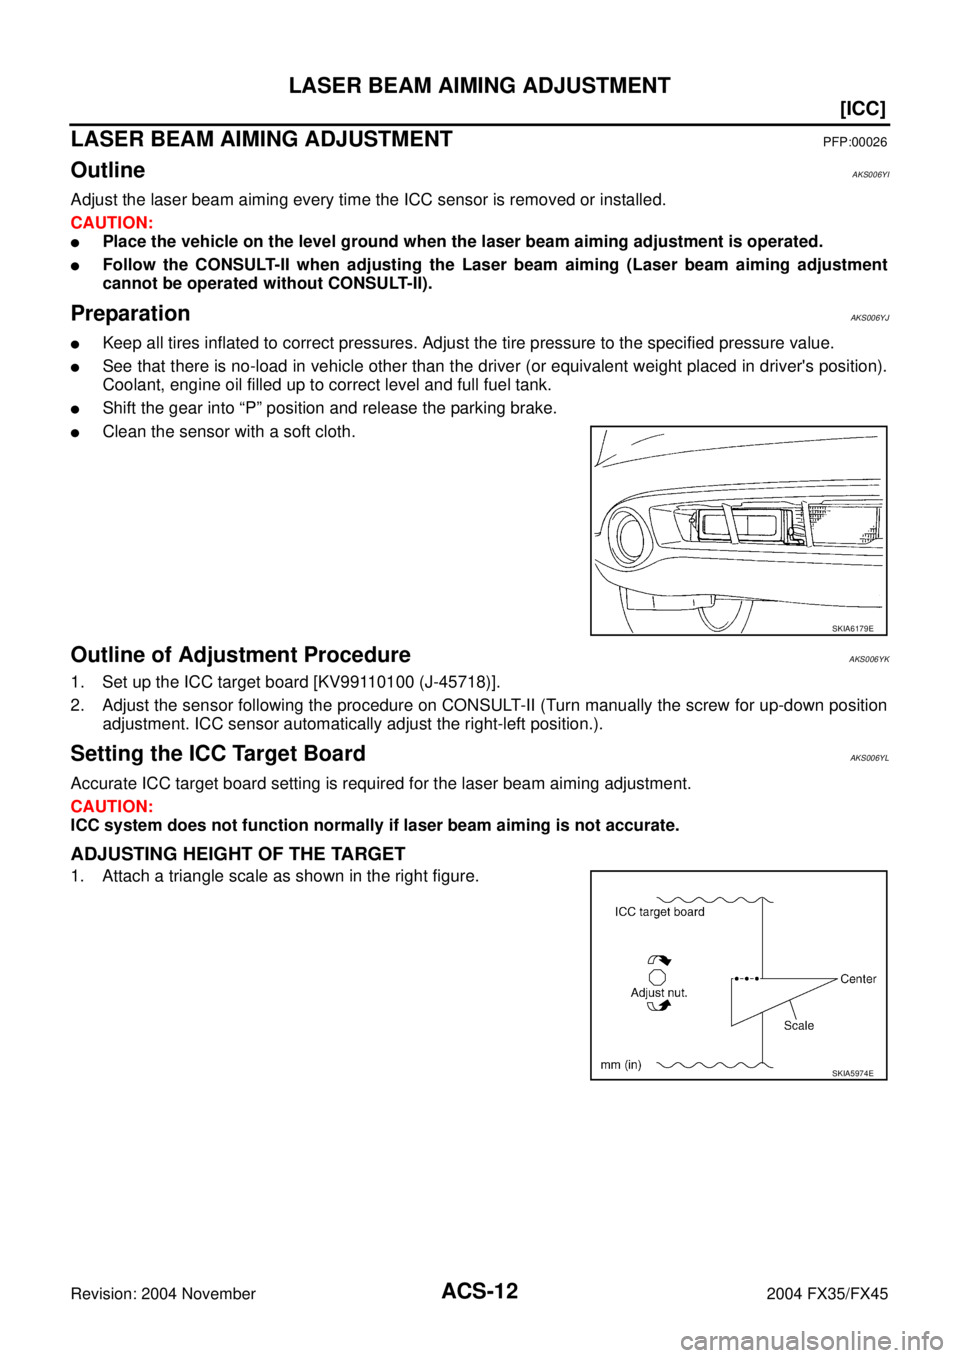 INFINITI FX35 2004 Owners Manual ACS-12
[ICC]
LASER BEAM AIMING ADJUSTMENT
Revision: 2004 November 2004 FX35/FX45
LASER BEAM AIMING ADJUSTMENTPFP:00026
OutlineAKS006YI
Adjust the laser beam aiming every time the ICC sensor is removed